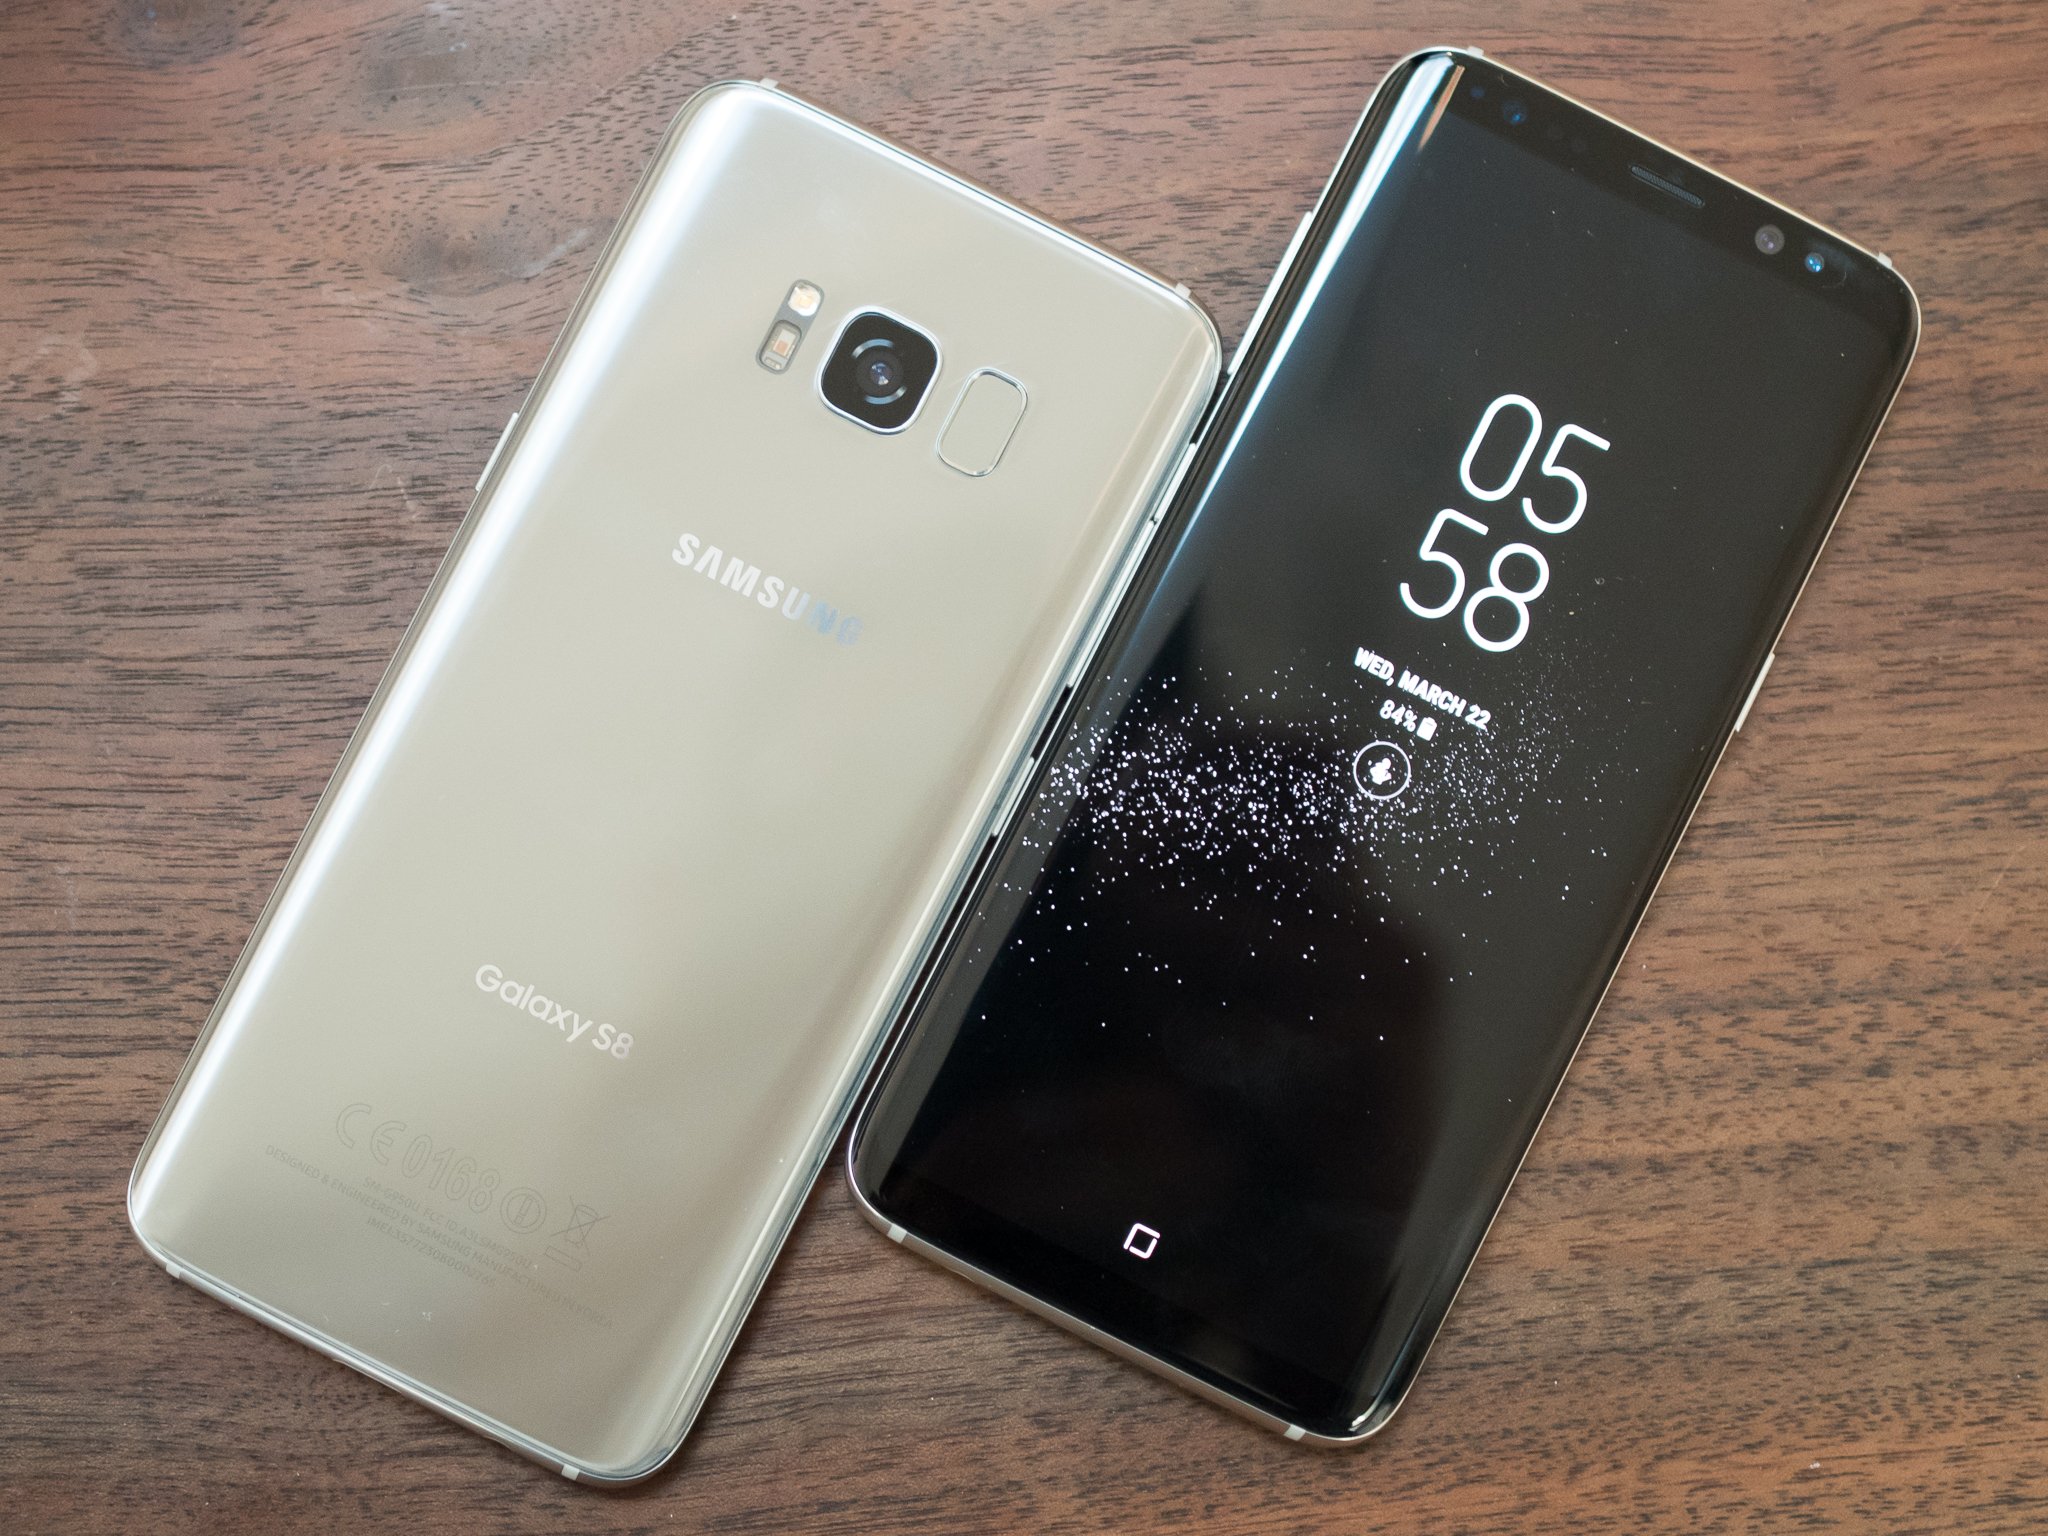 Samsung Galaxy S8 and S8+ specs